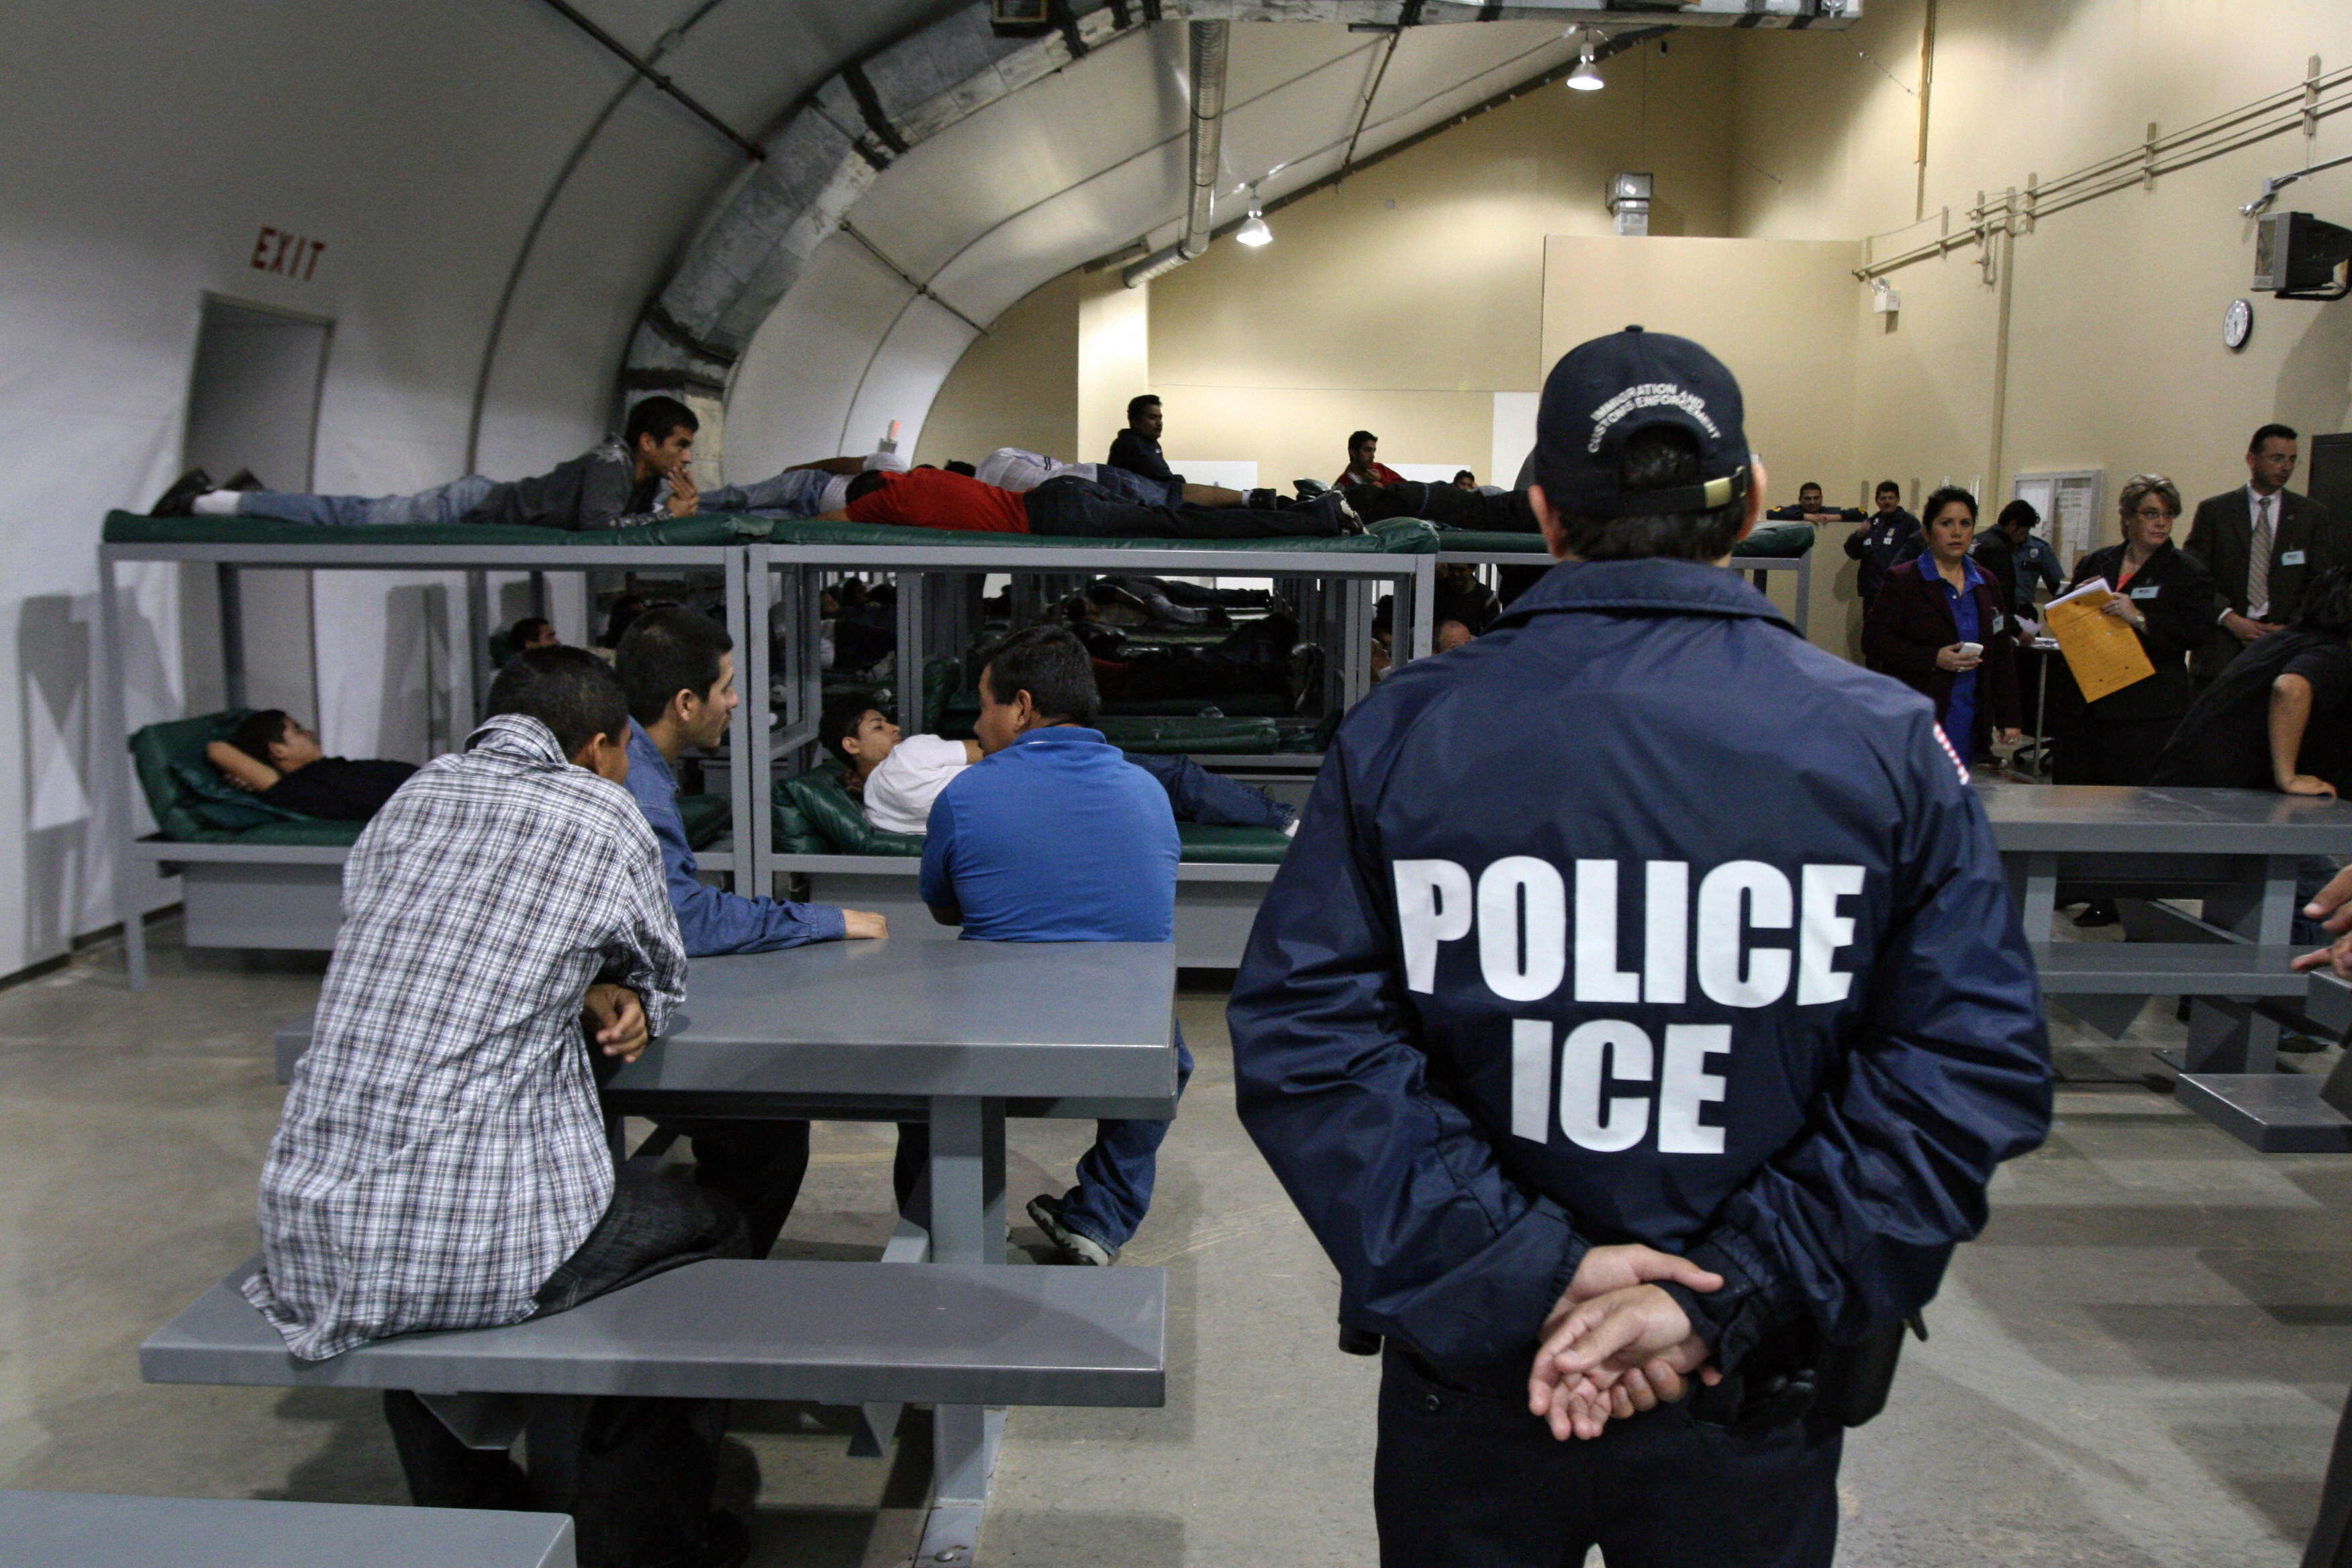 A photograph of an Immigrations and Customs Enforcement Officer